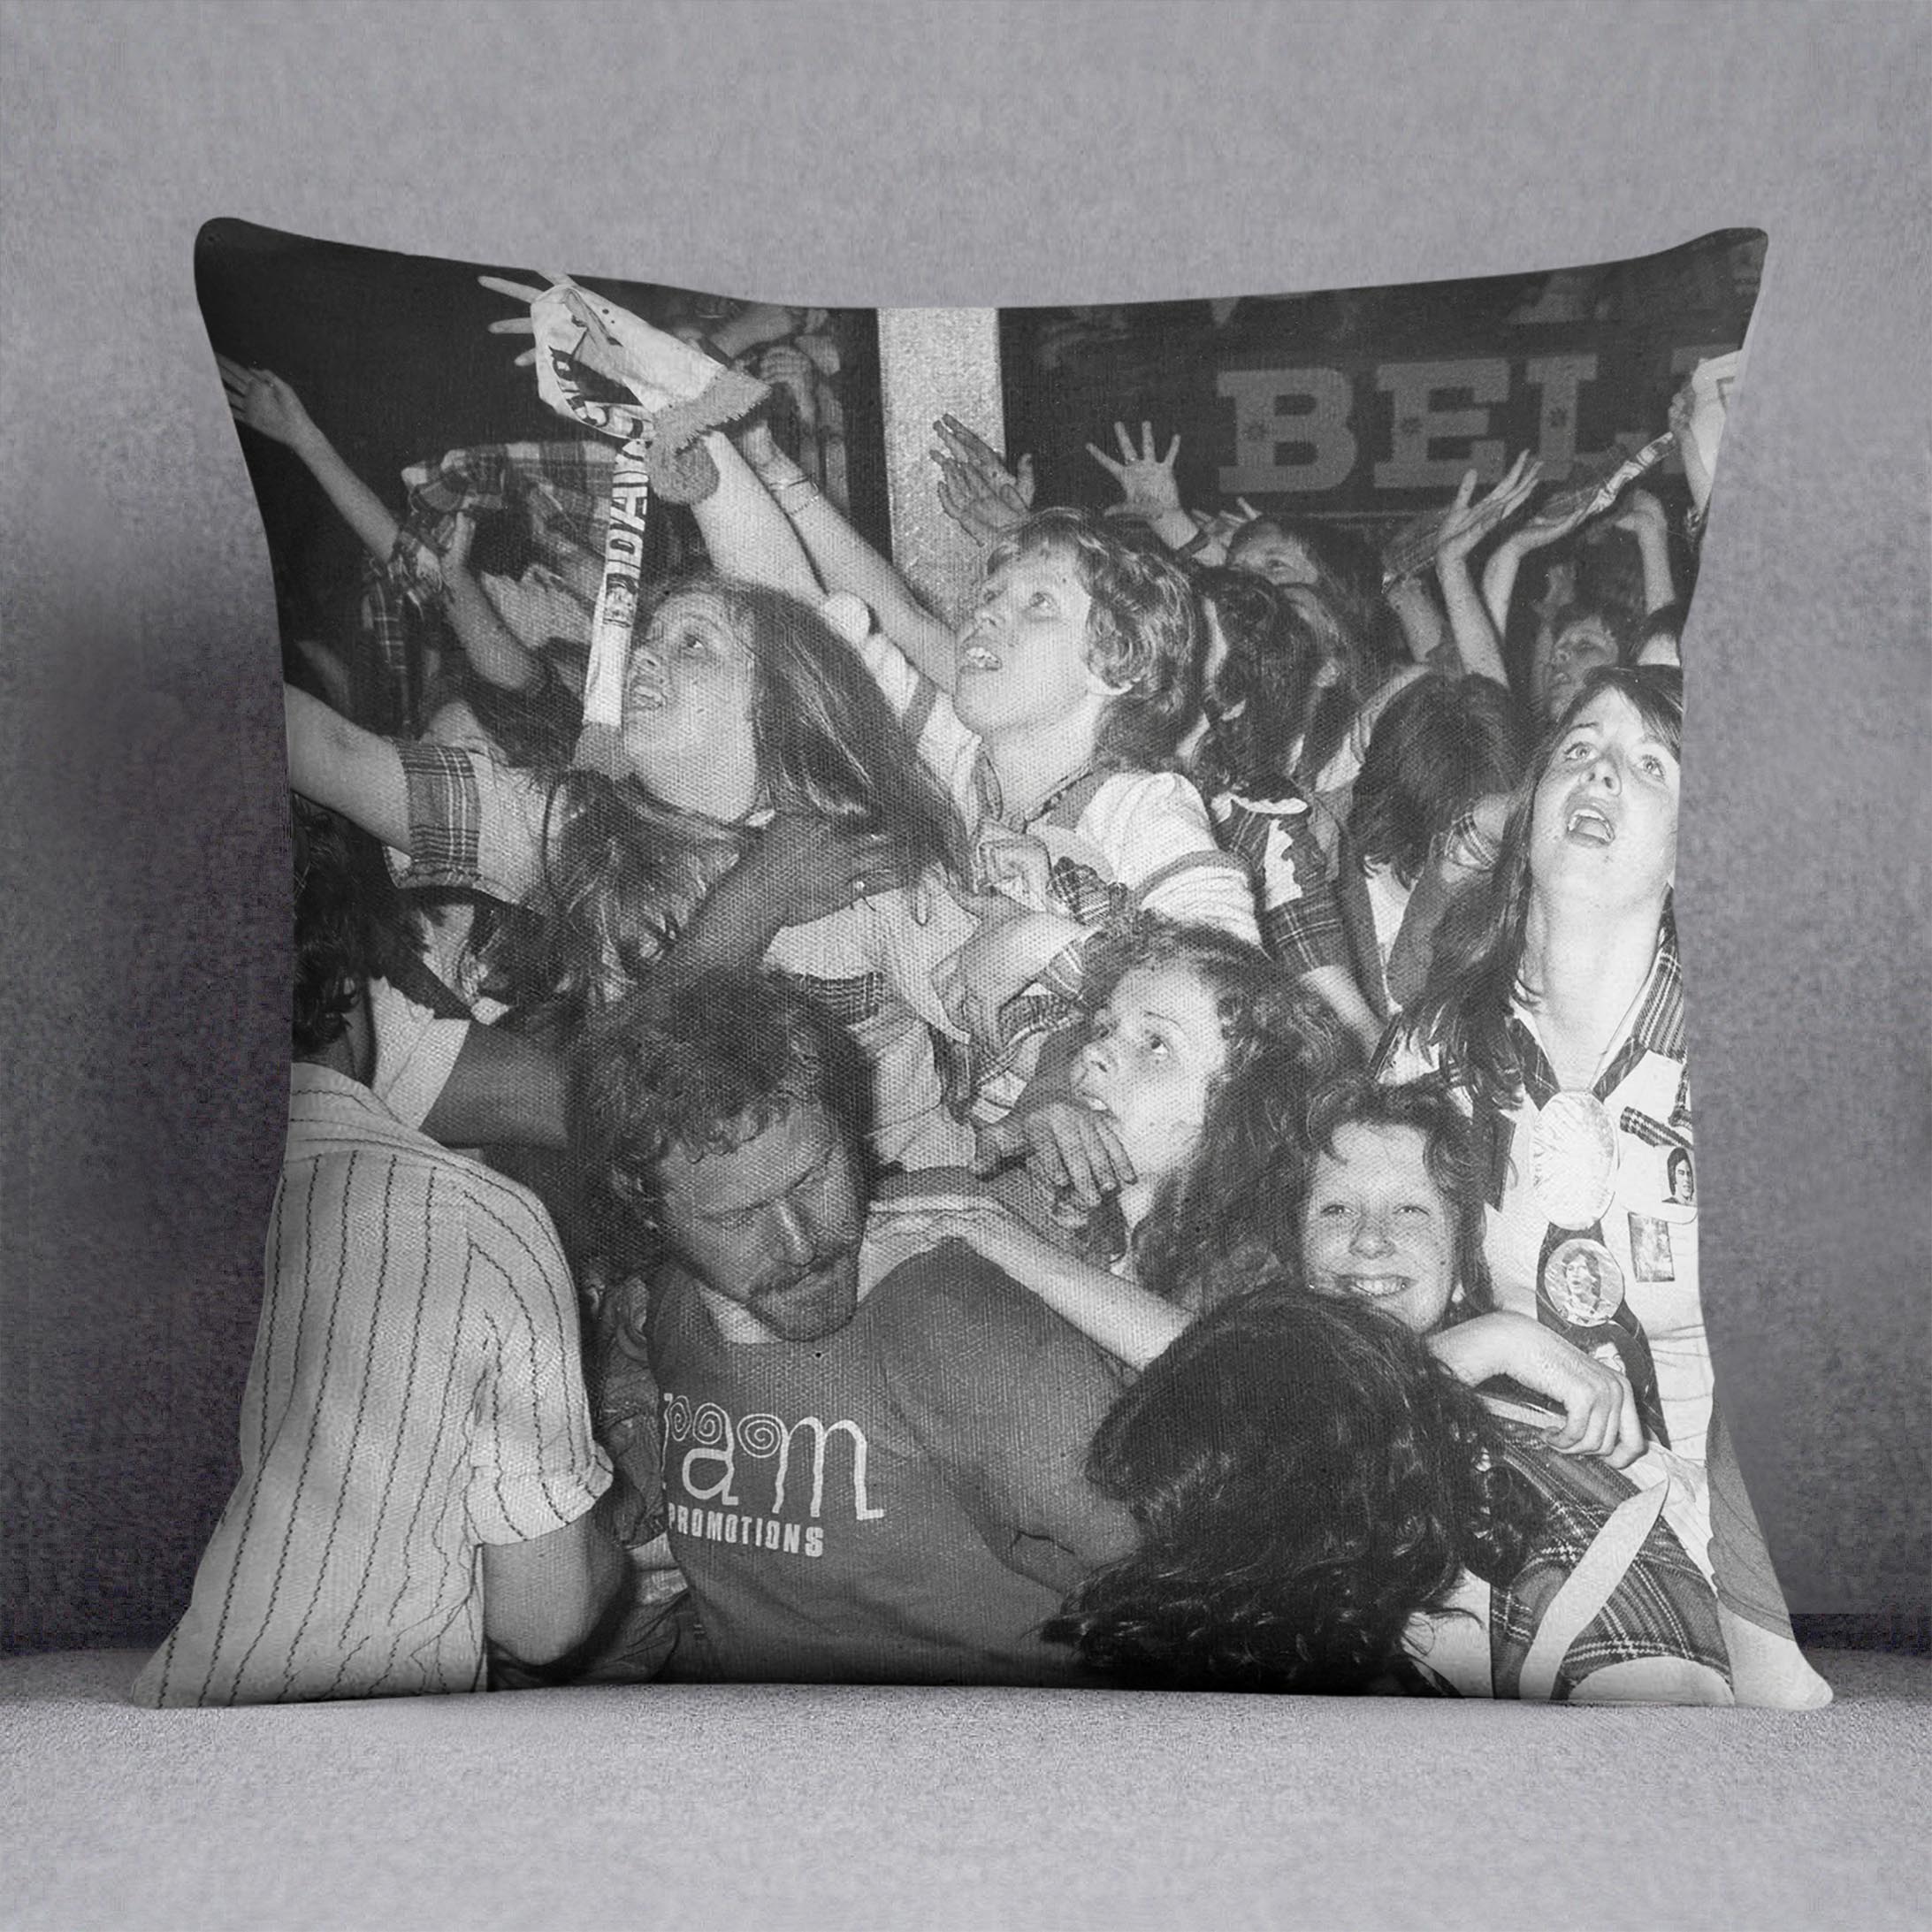 Fans of The Bay City Rollers Cushion